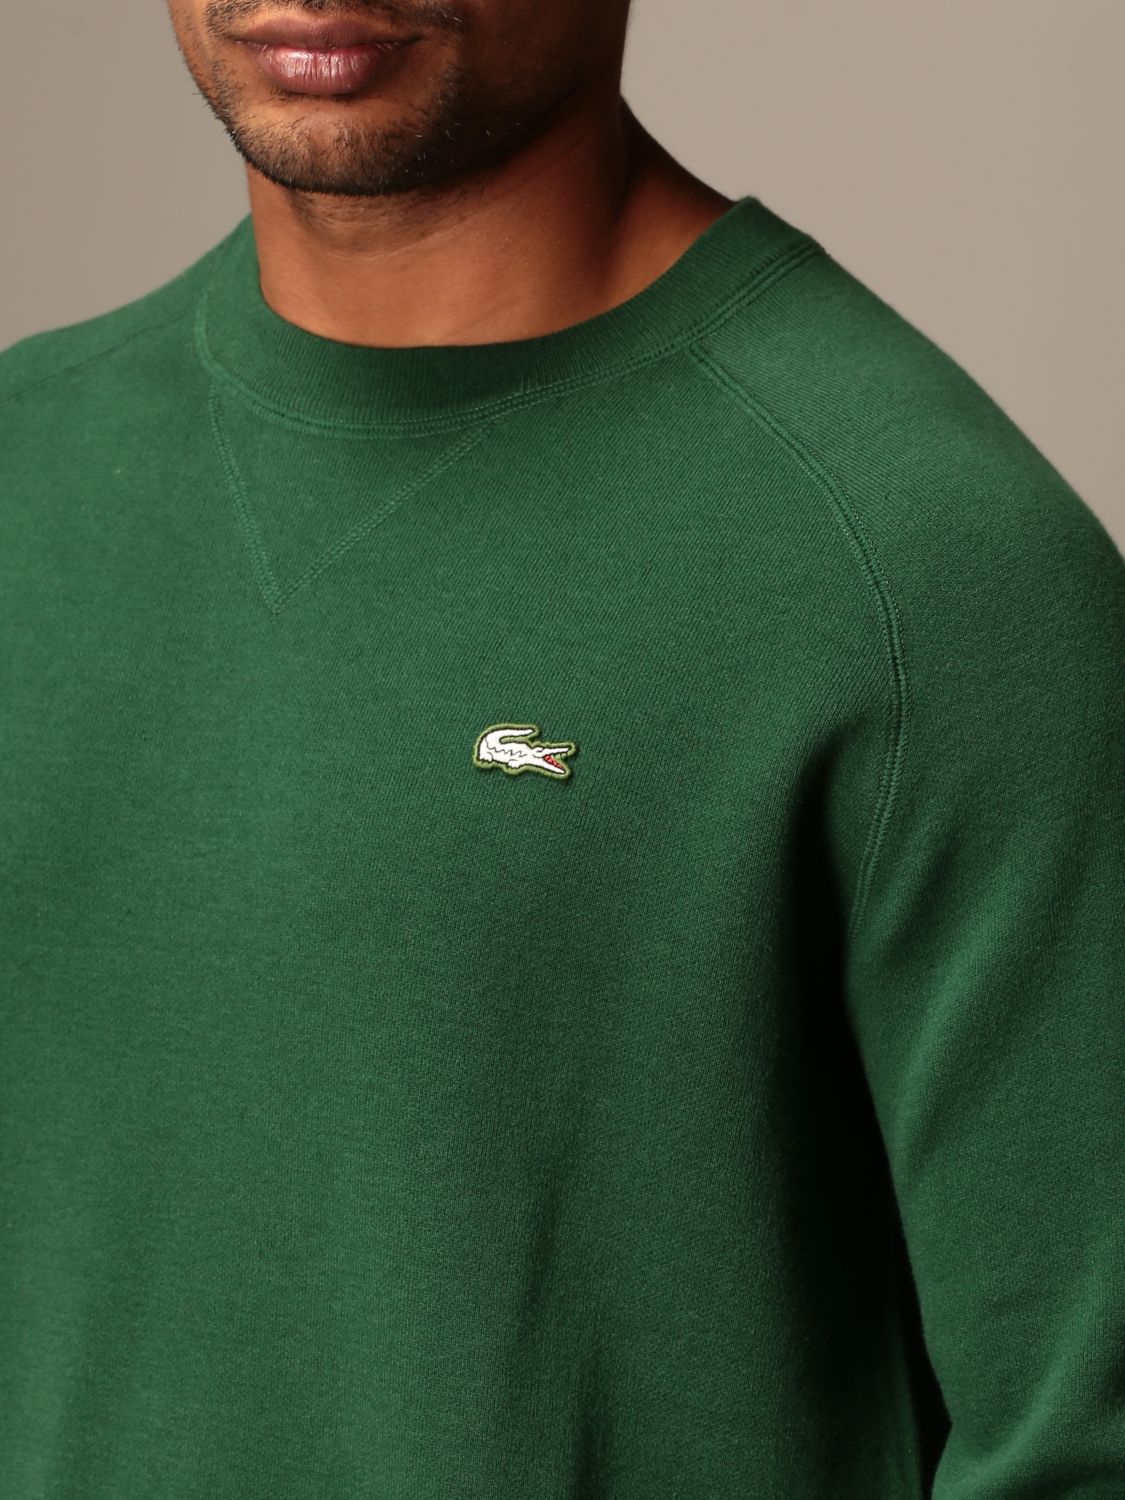 LACOSTE L!VE: Lacoste L! Ve crewneck sweater with logo - Green ...